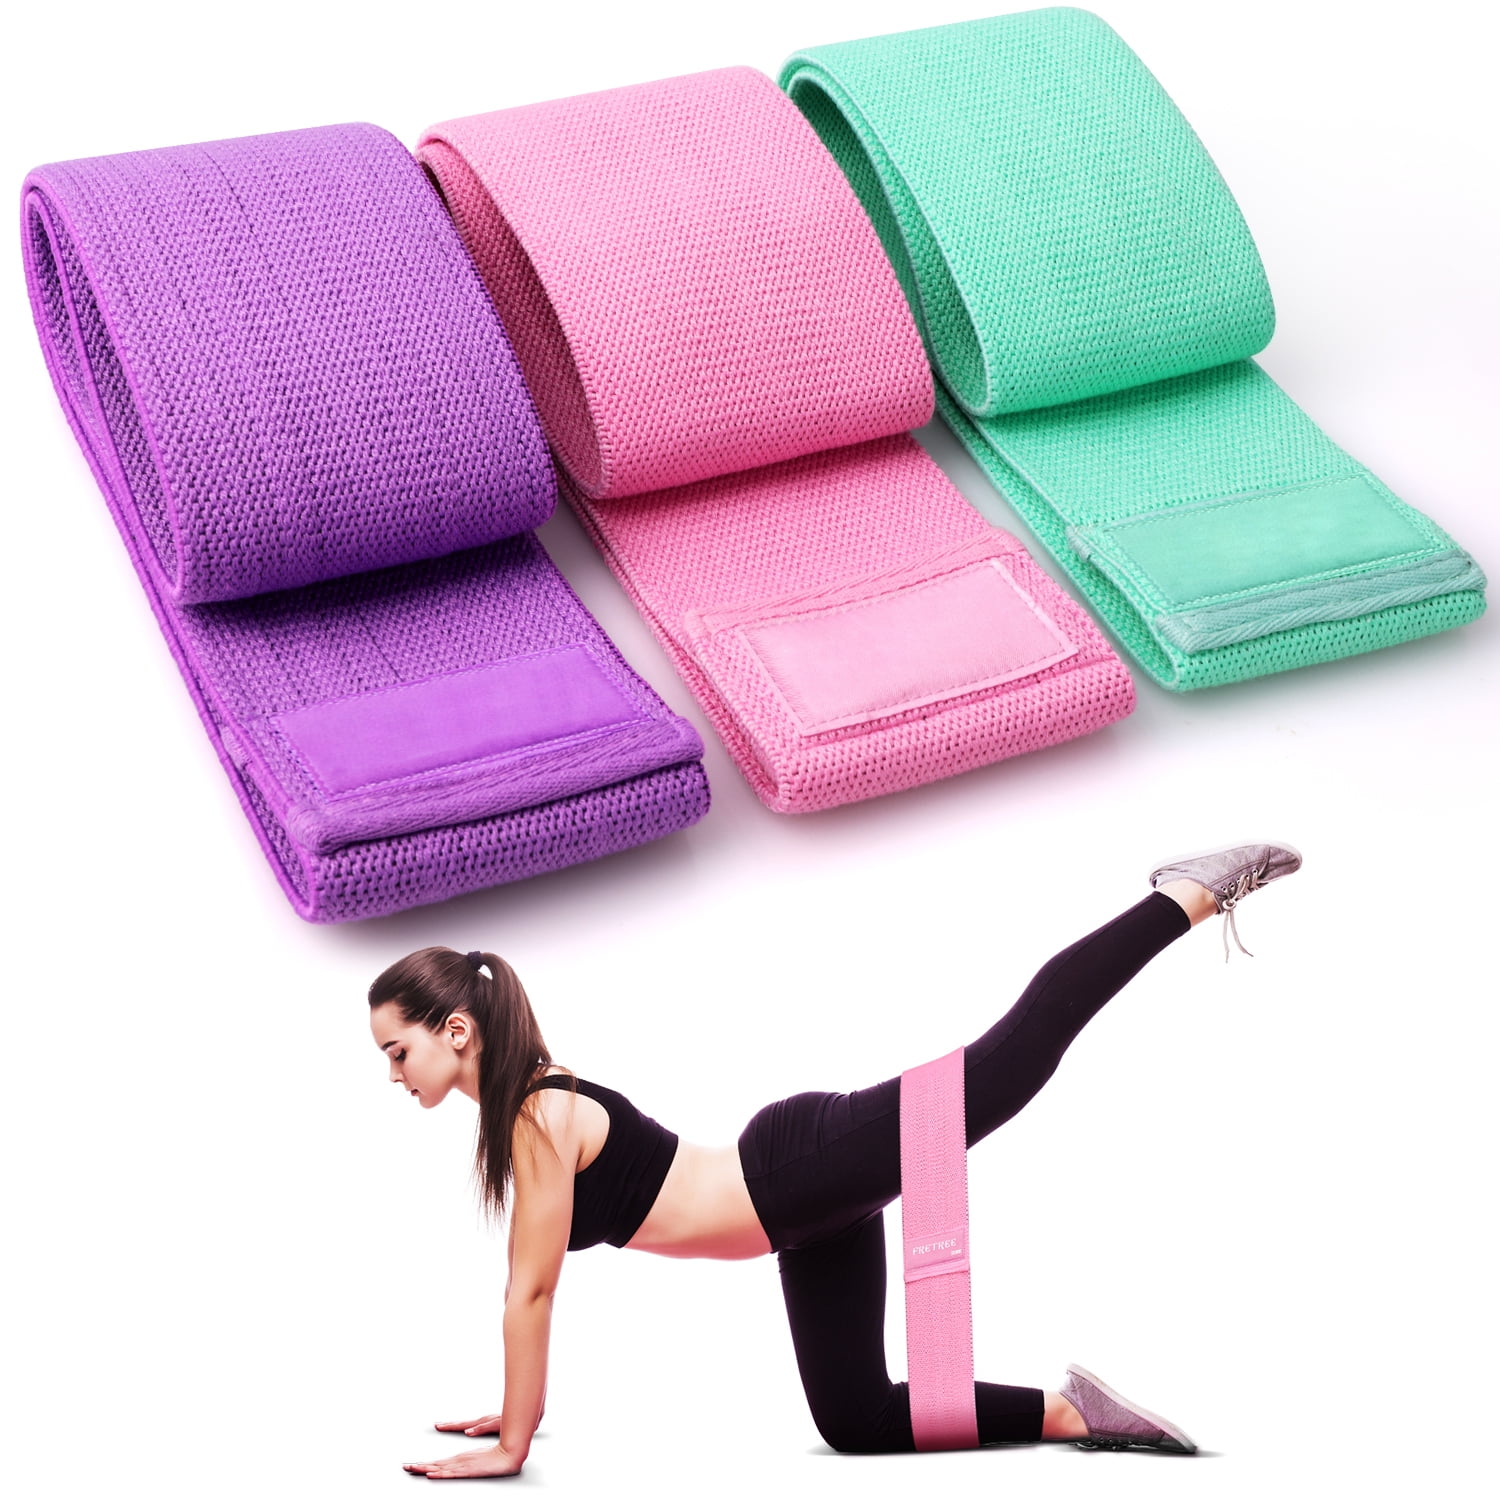 Resistance Bands for Legs and Booty - Exercise Bands Set Women/Men